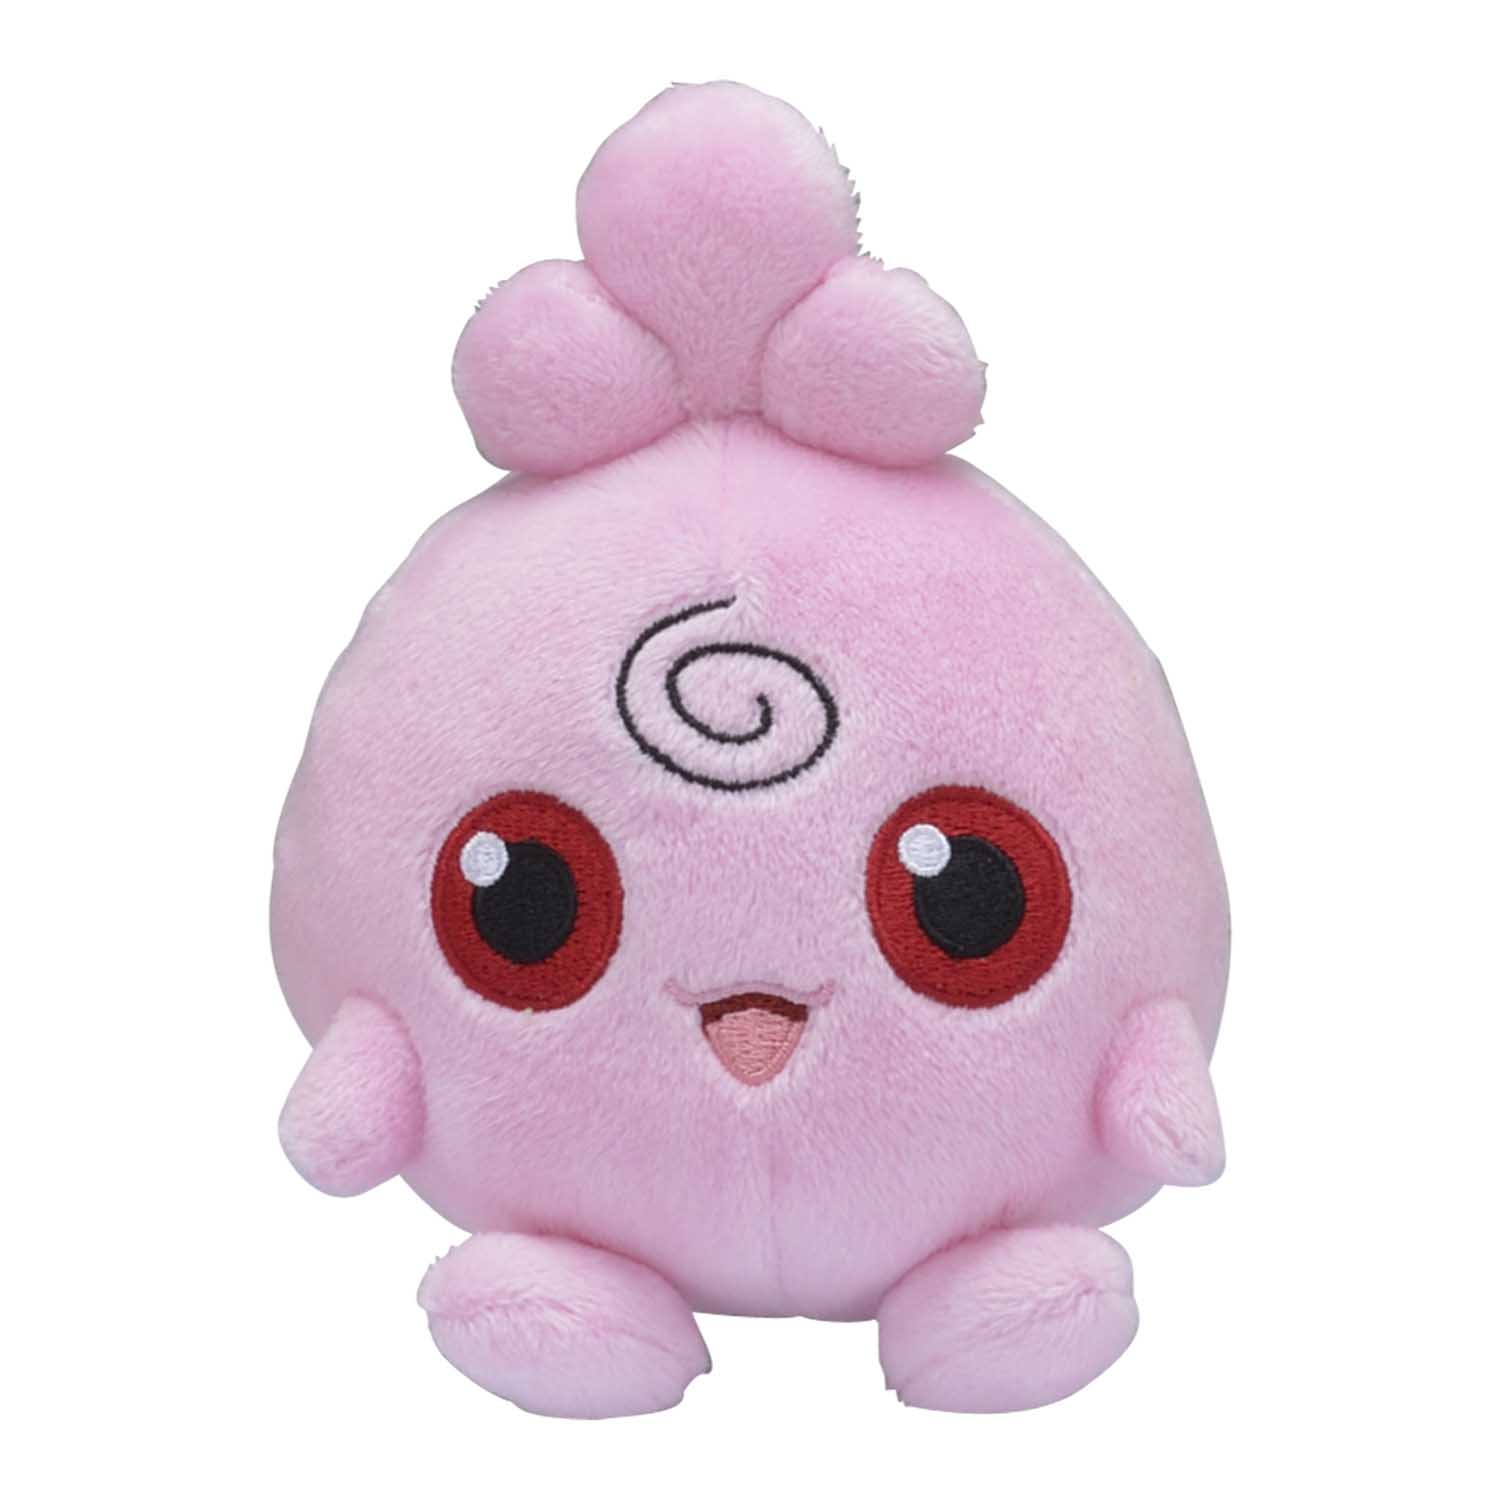 Cutie Fit Igglybuff Plush Doll Stuffed Toy Pocket 2019 5inch Anime Game Gift 